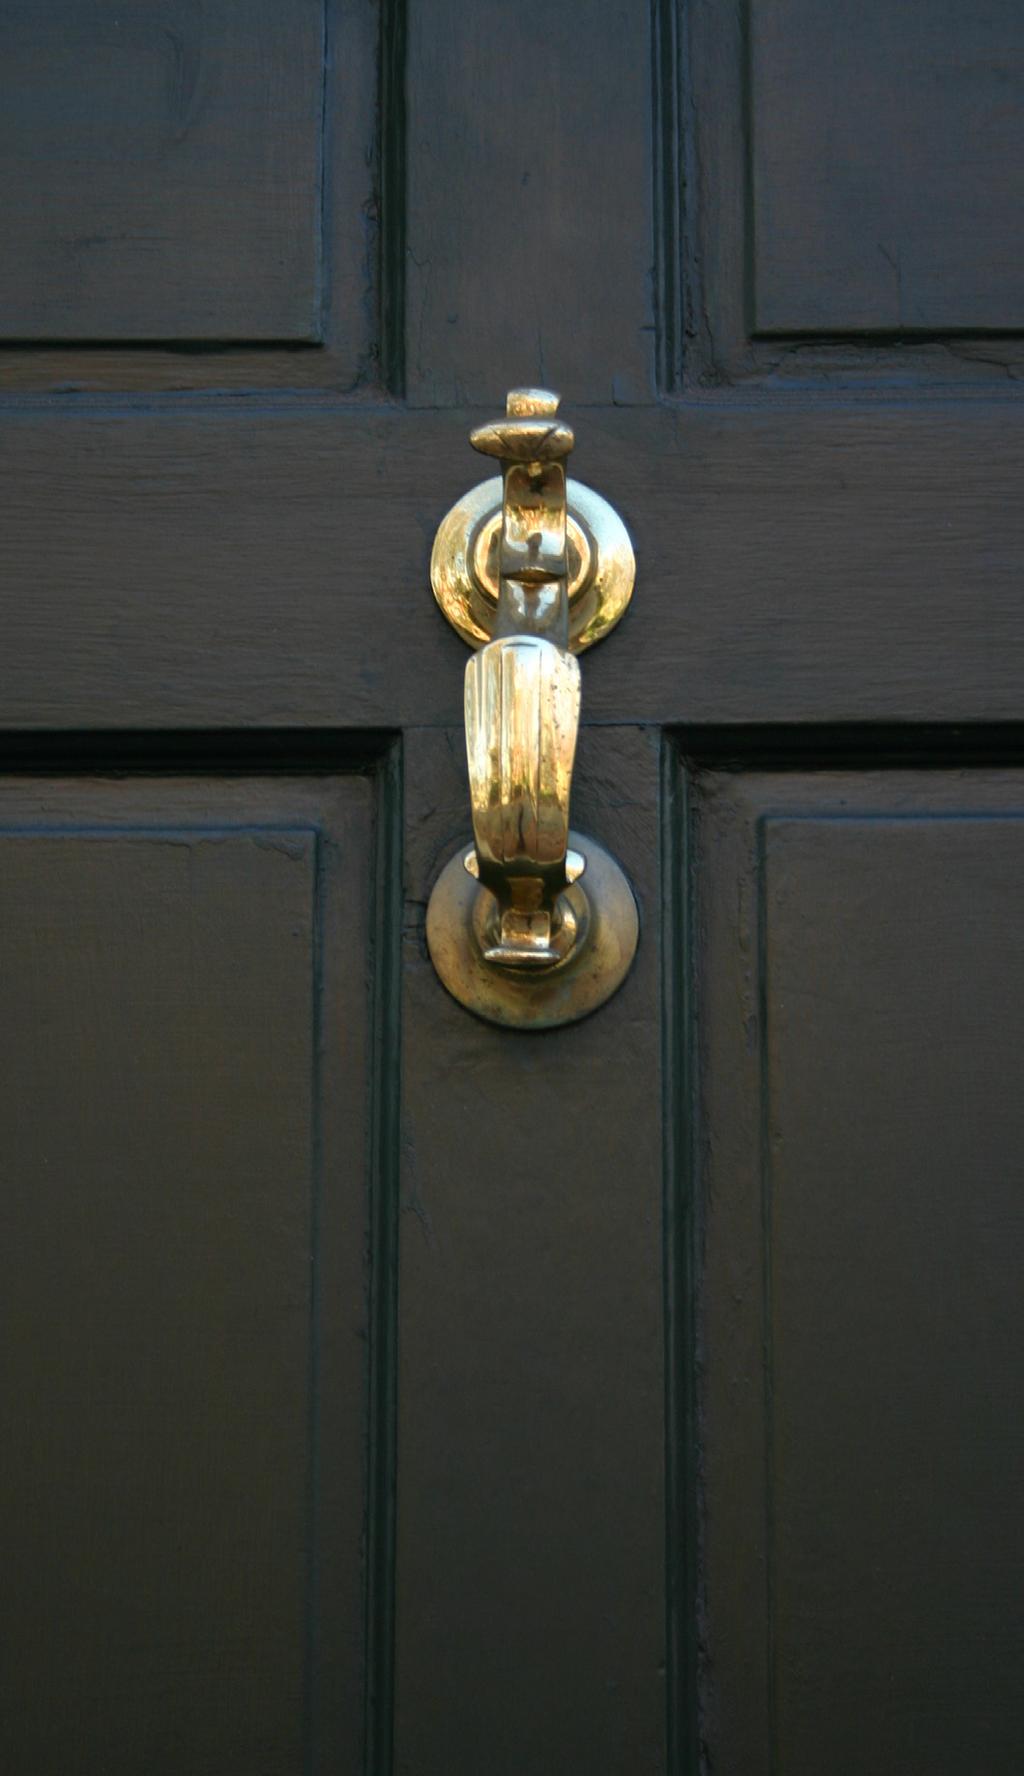 There was no door bell at 98 Benefit Street. Just a brass door knocker. I followed my procedure of documentation: I stepped back, framed the knocker in my camera, and took a photograph.